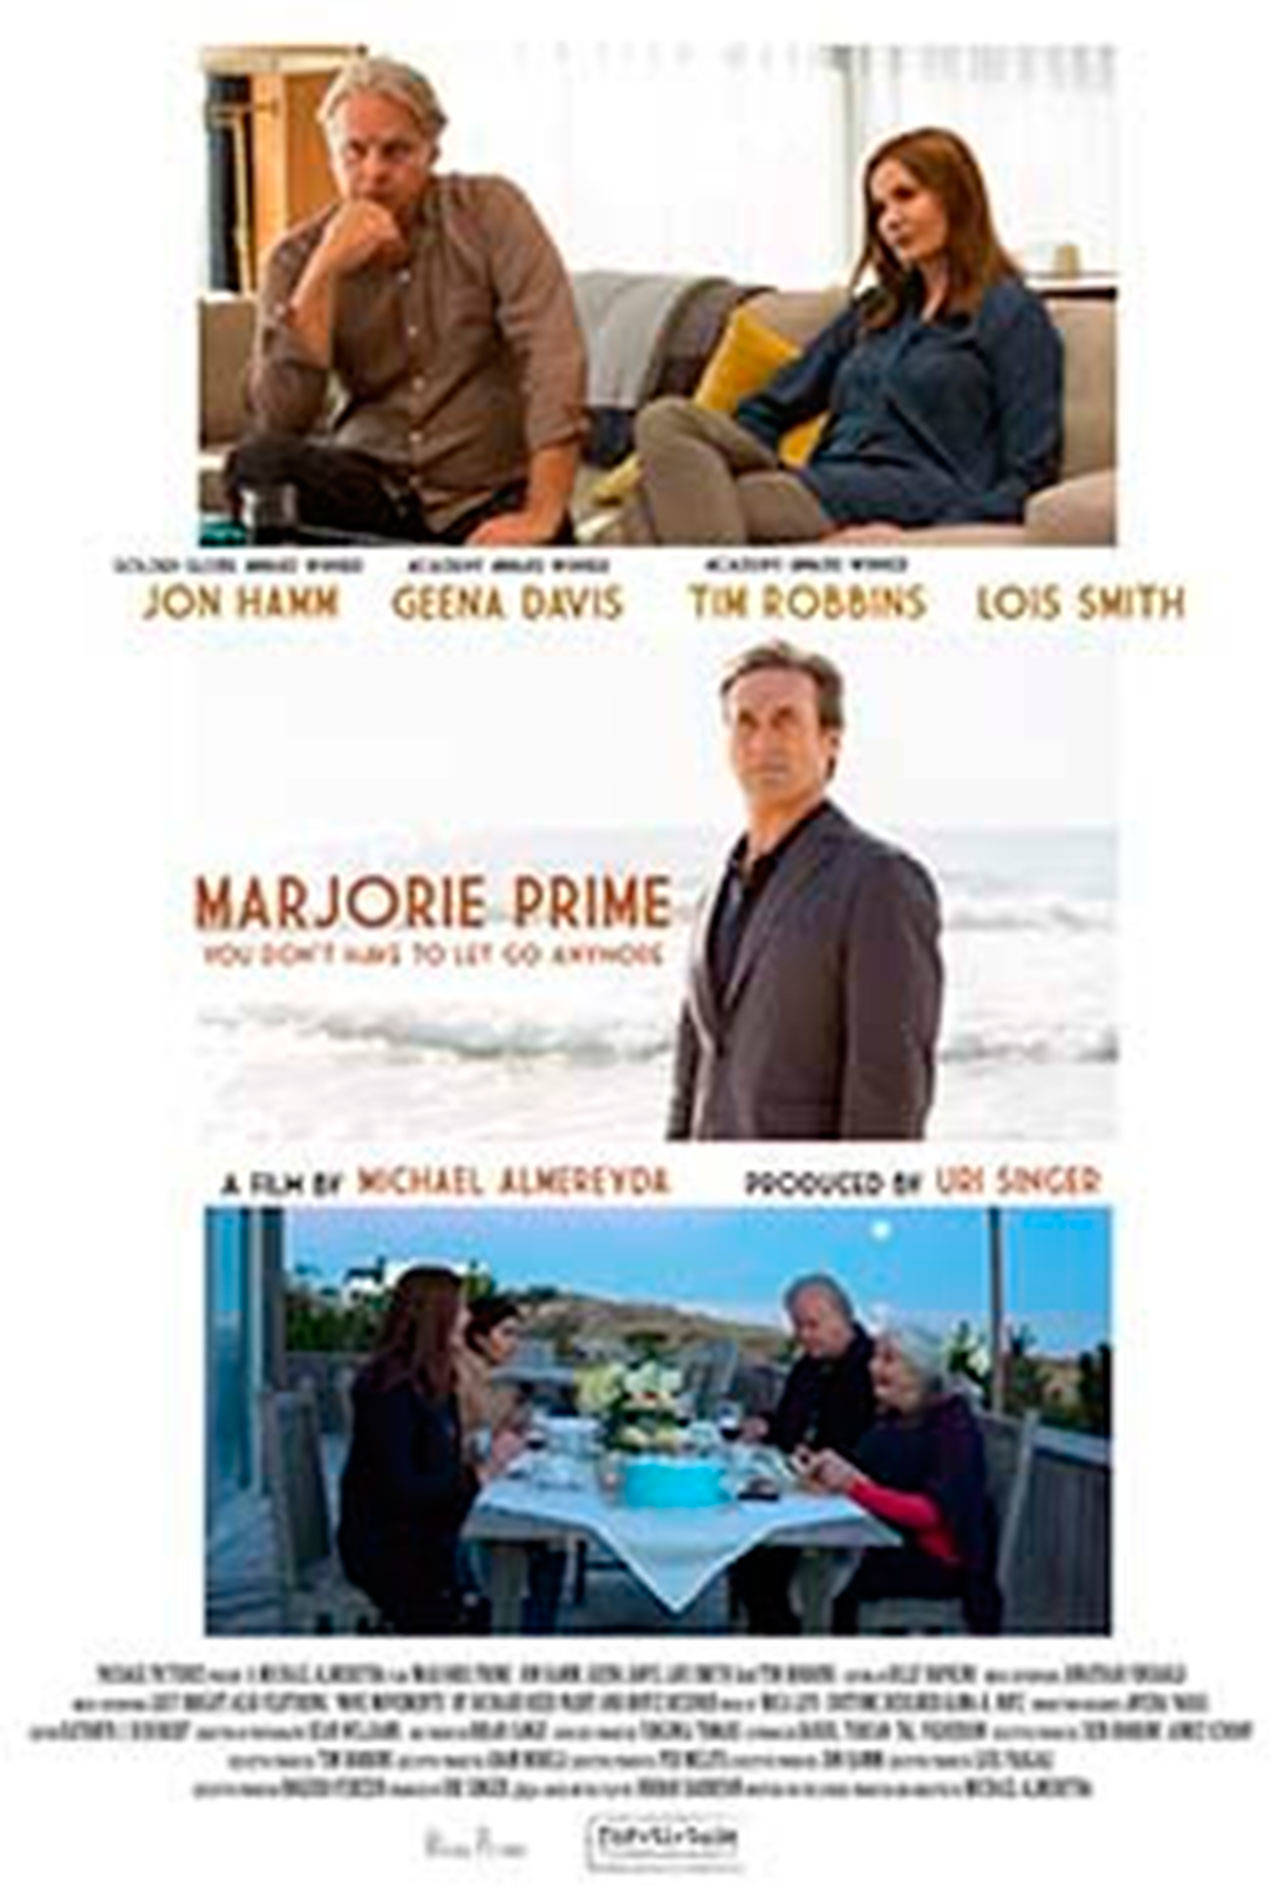 Image courtesy of FilmRise | “Marjorie Prime,” a new film directed by Michael Almereyda, and based on the work of playwright - Bainbridge High School graduate - Jordan Harrison’s Pulitzer finalist play of the same name, will premiere at Bainbridge Cinemas Friday, Sept. 29.